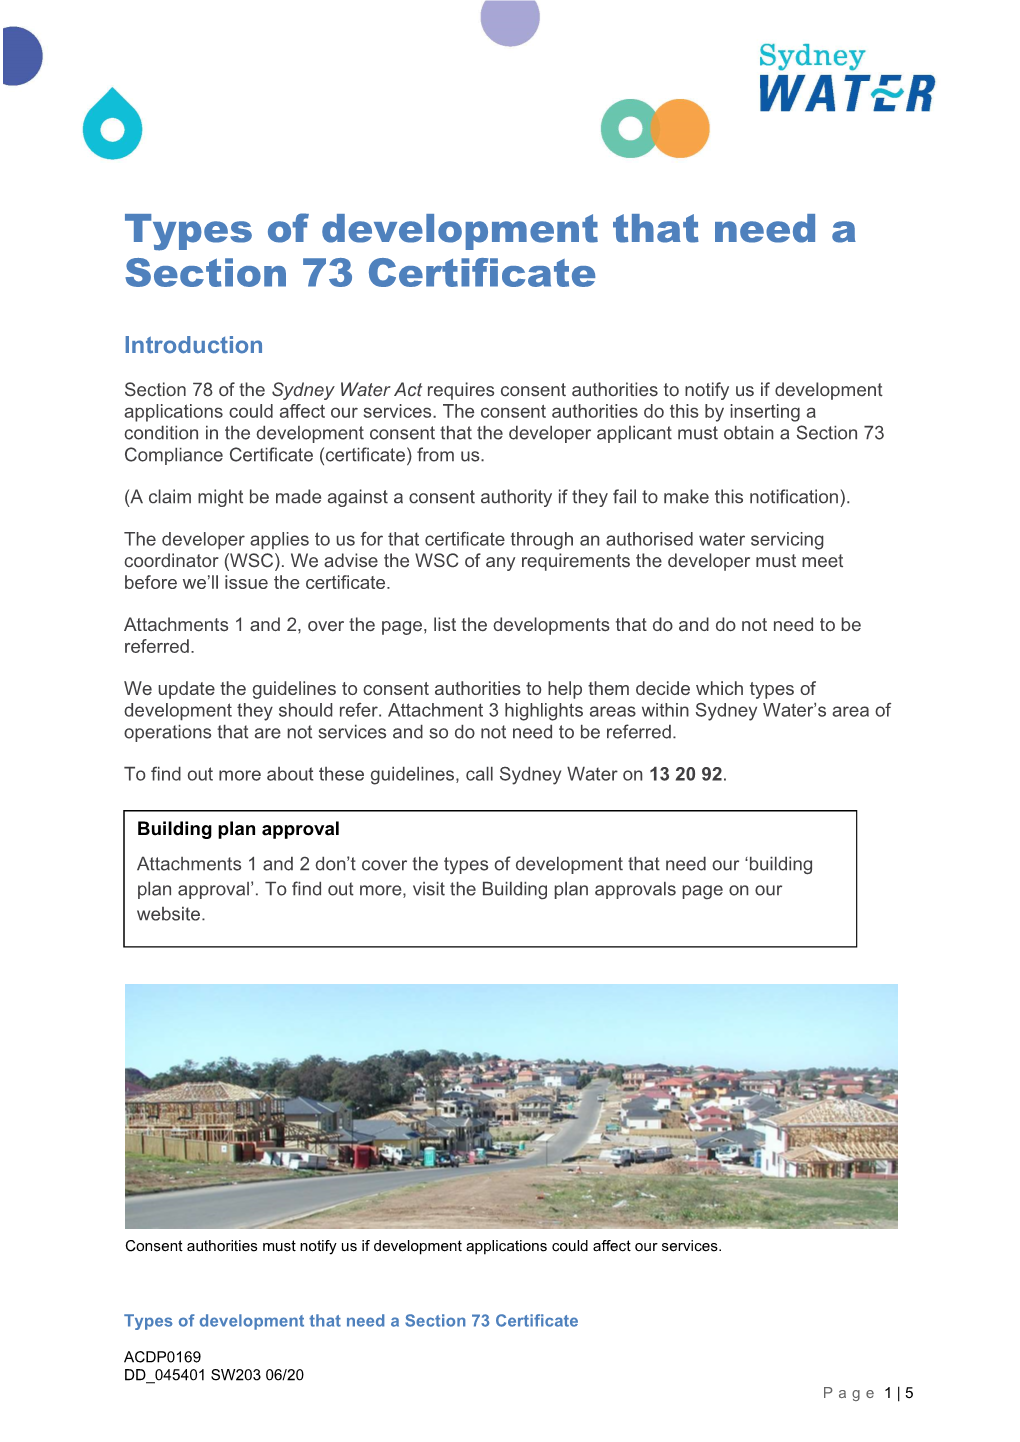 Types of Development That Need a Section 73 Compliance Certificate